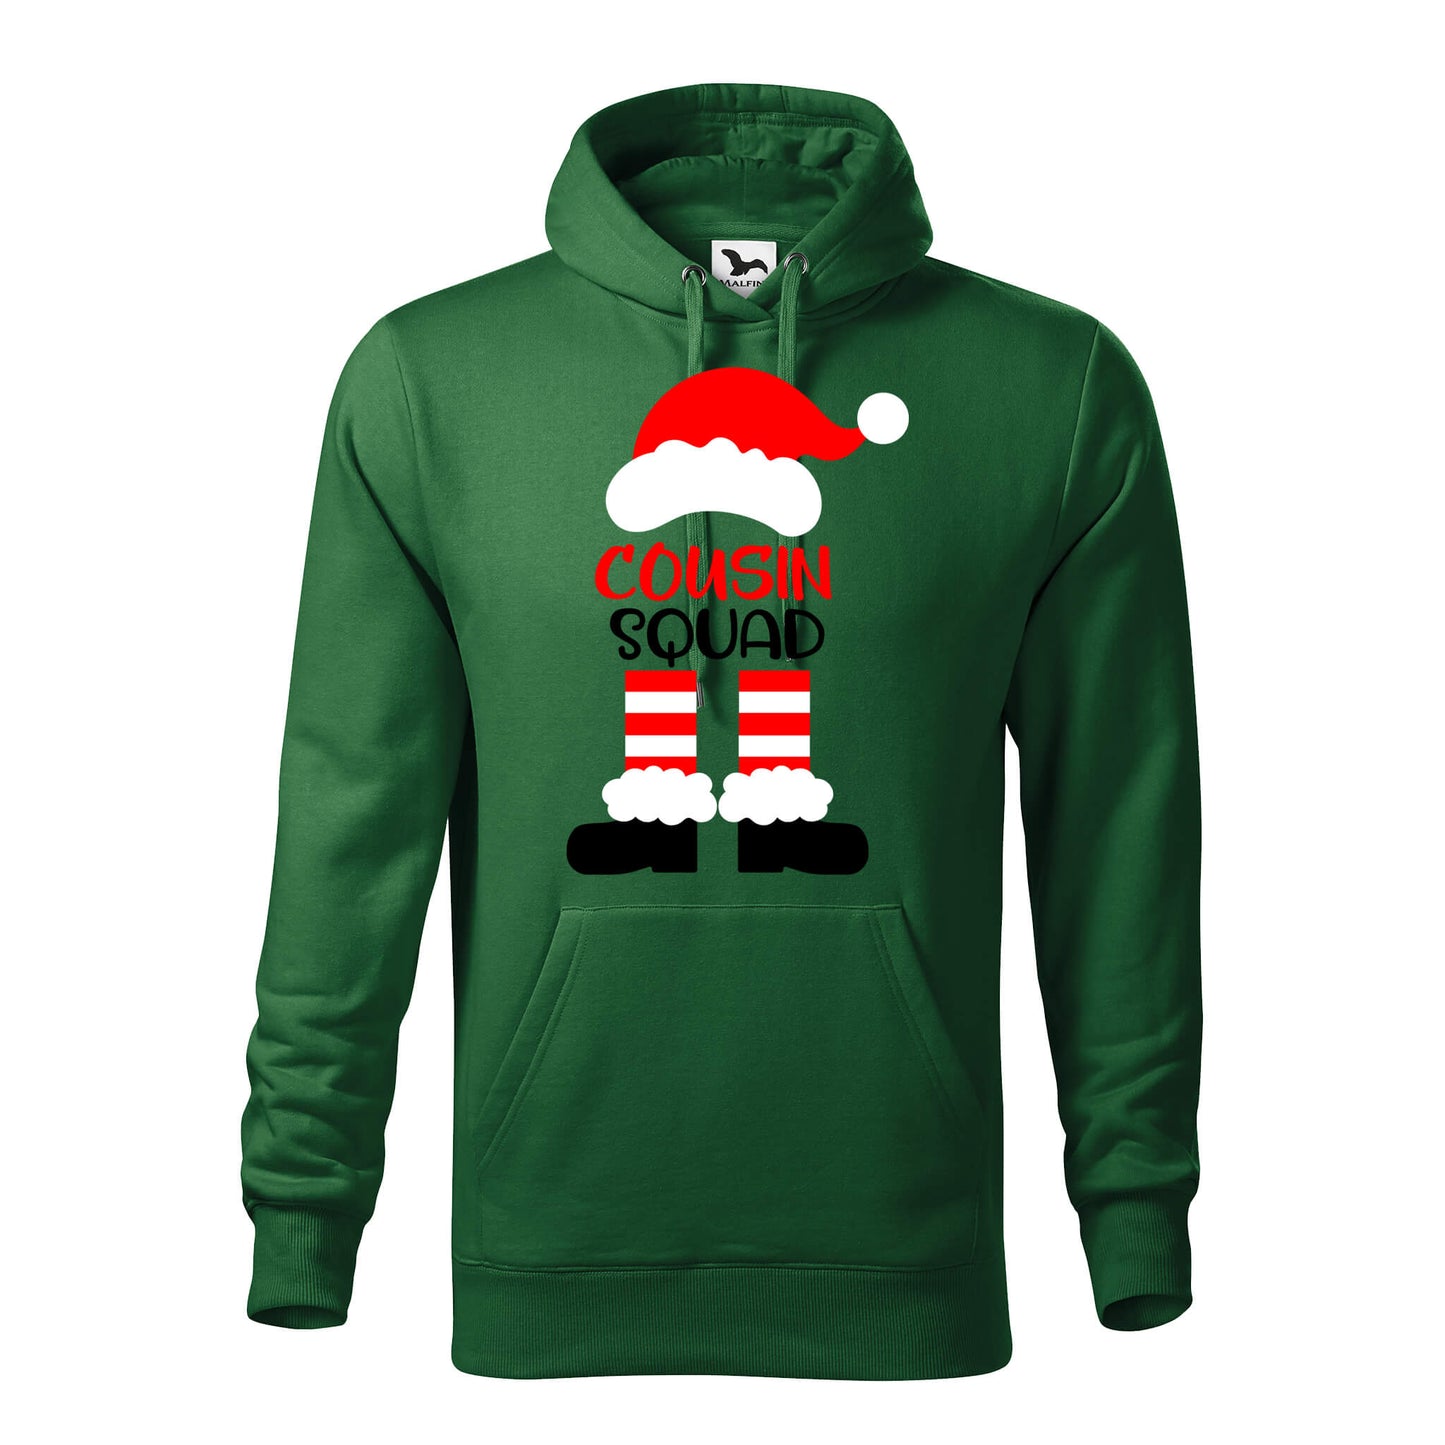 Cousin squad with santa hoodie - rvdesignprint